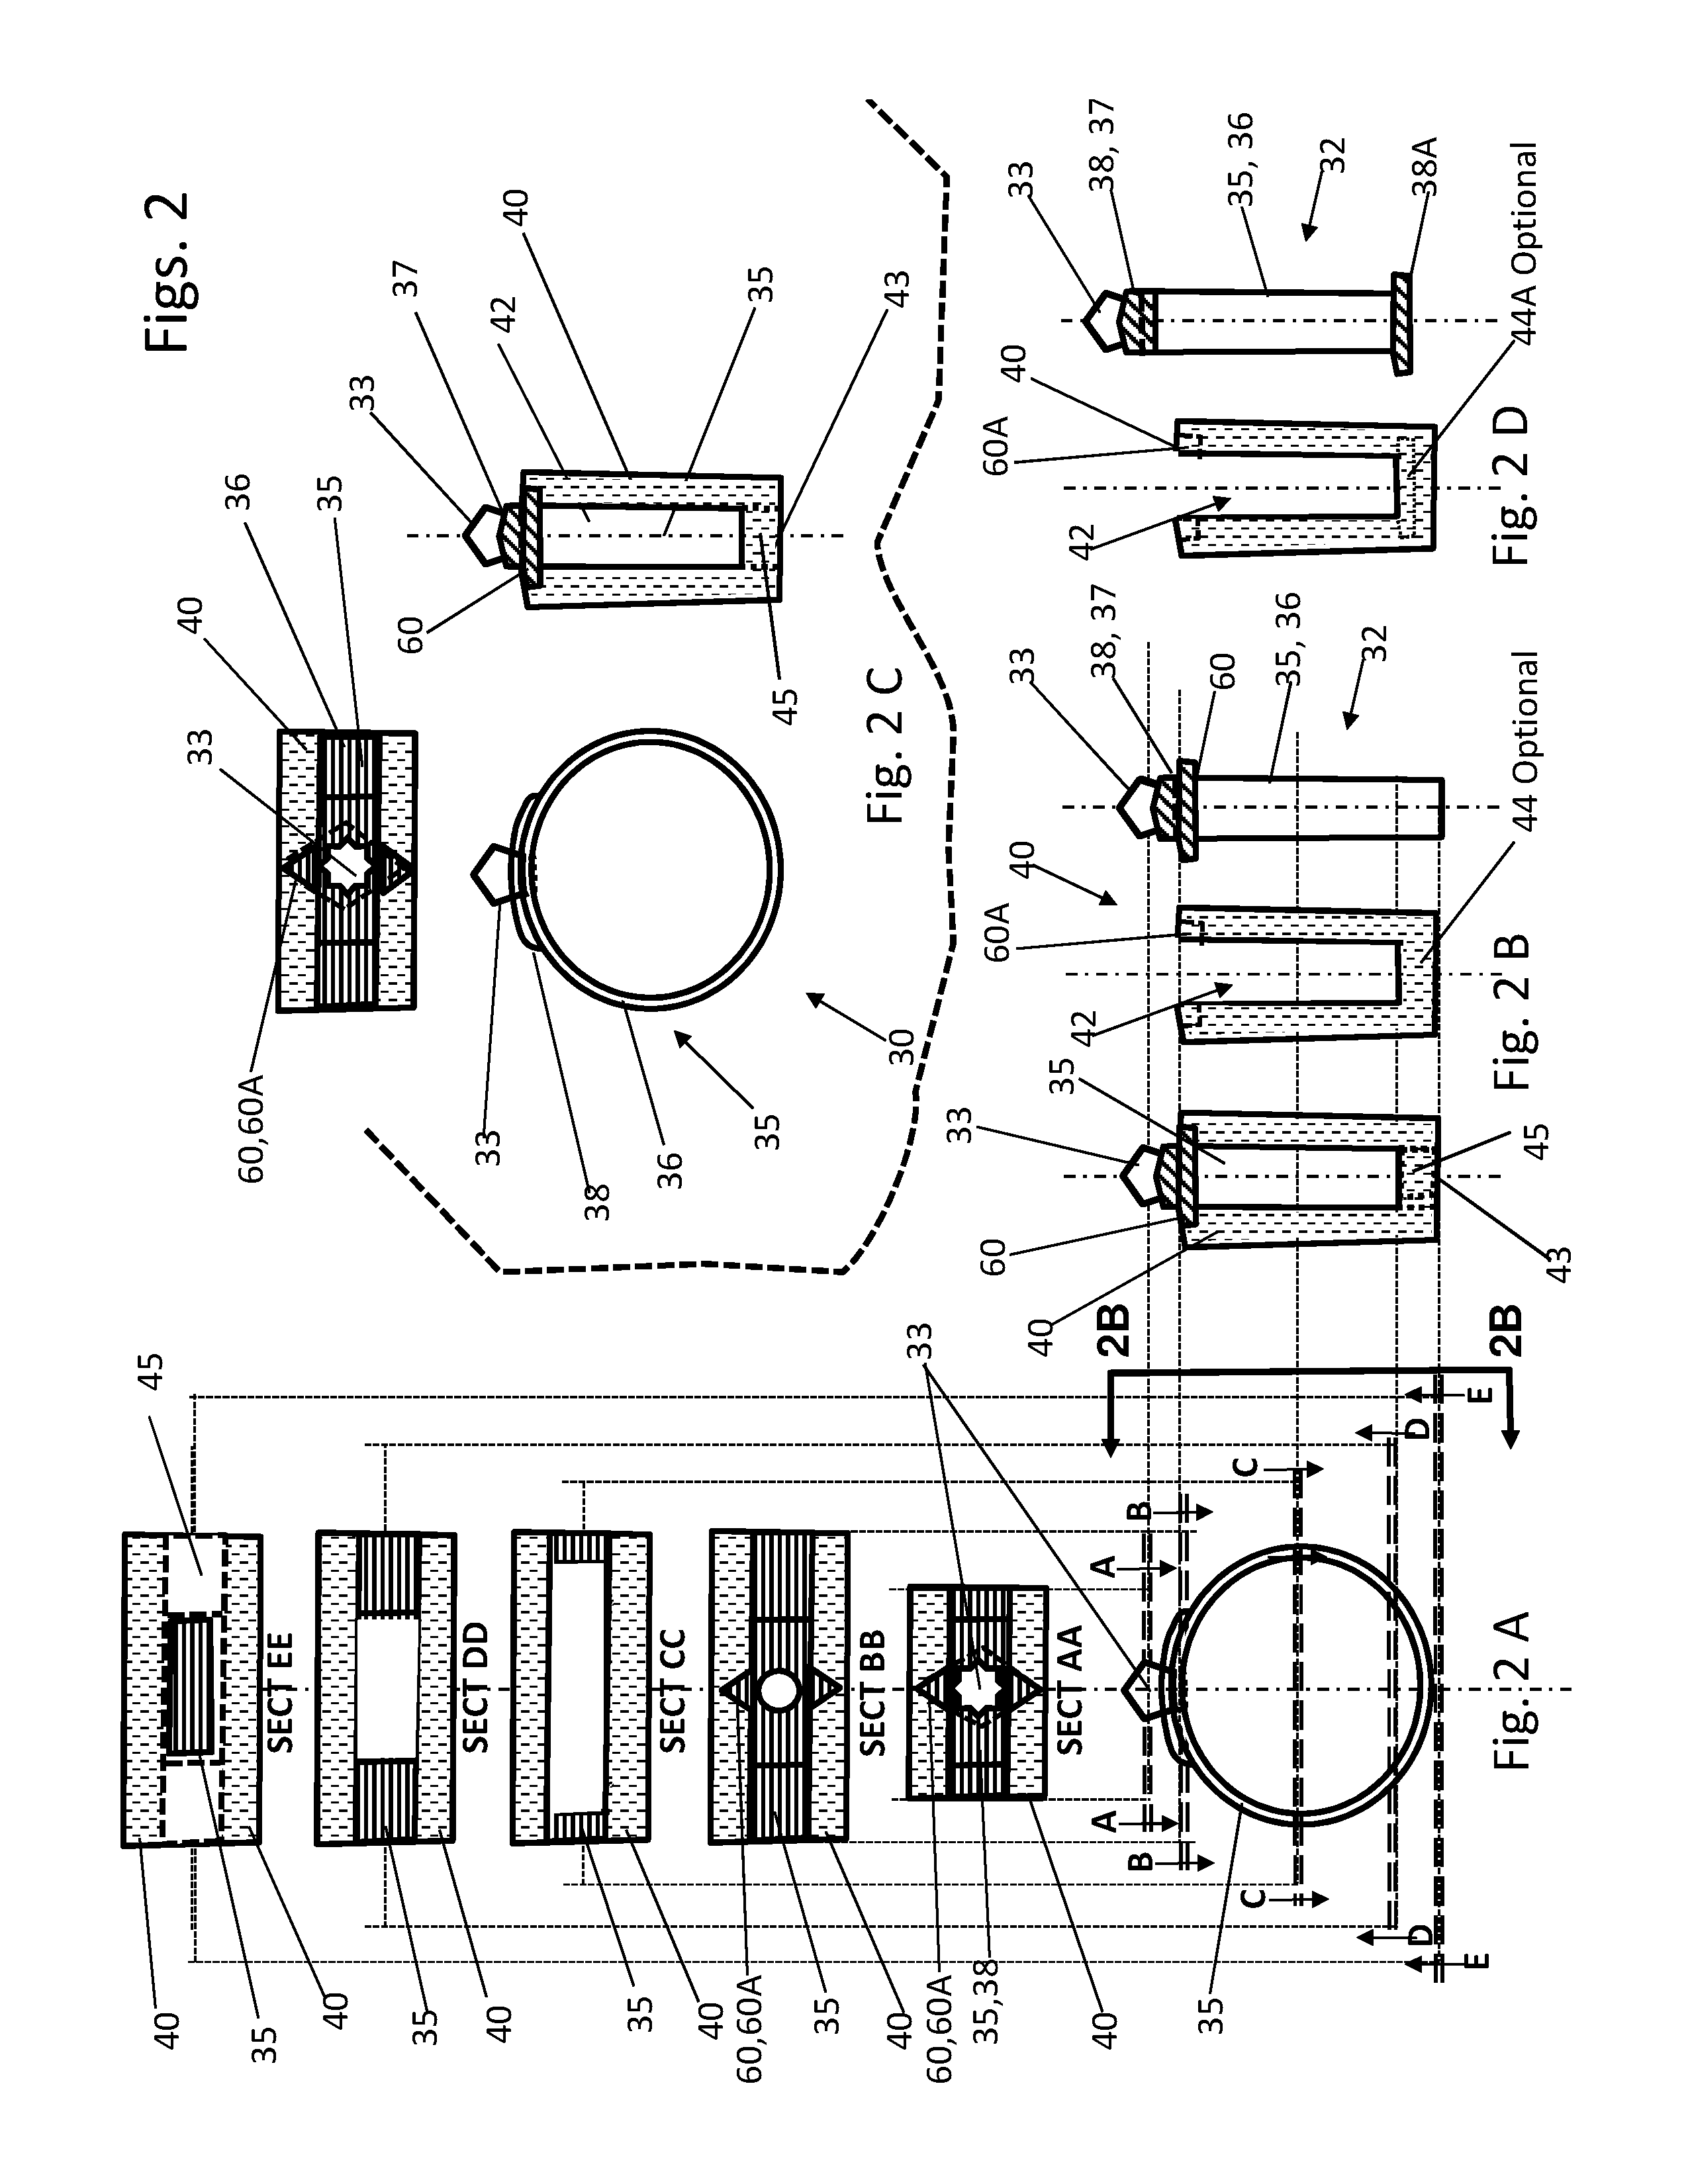 Interlocking ring system and device with interchangeable outer jackets and center rings called a TULIP